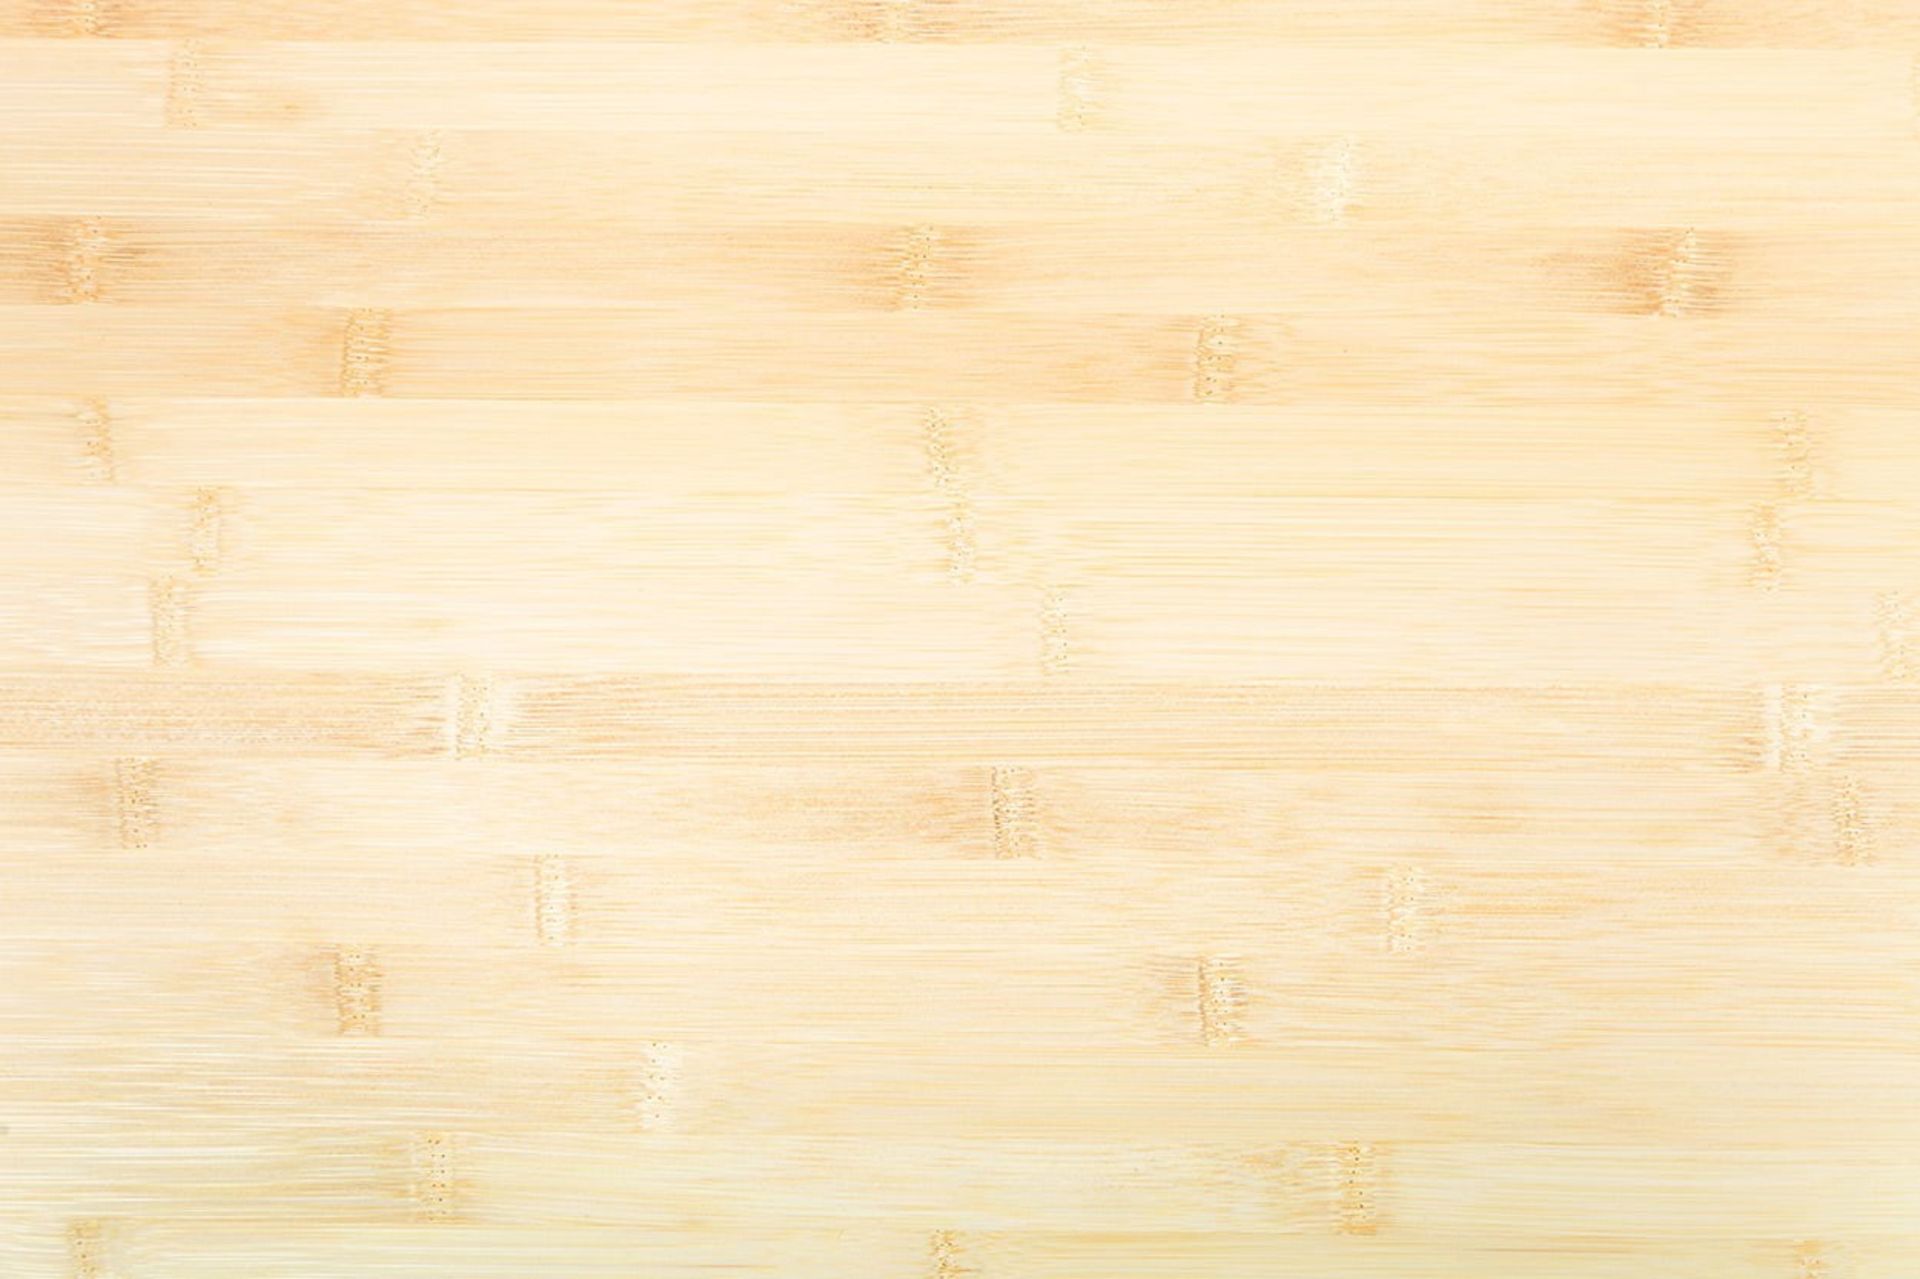 1 x Layered Solid Bamboo Wood Worktop - Size: 3000 x 900 x 40mm - Ideal For Kitchens, Countertops, - Image 2 of 4